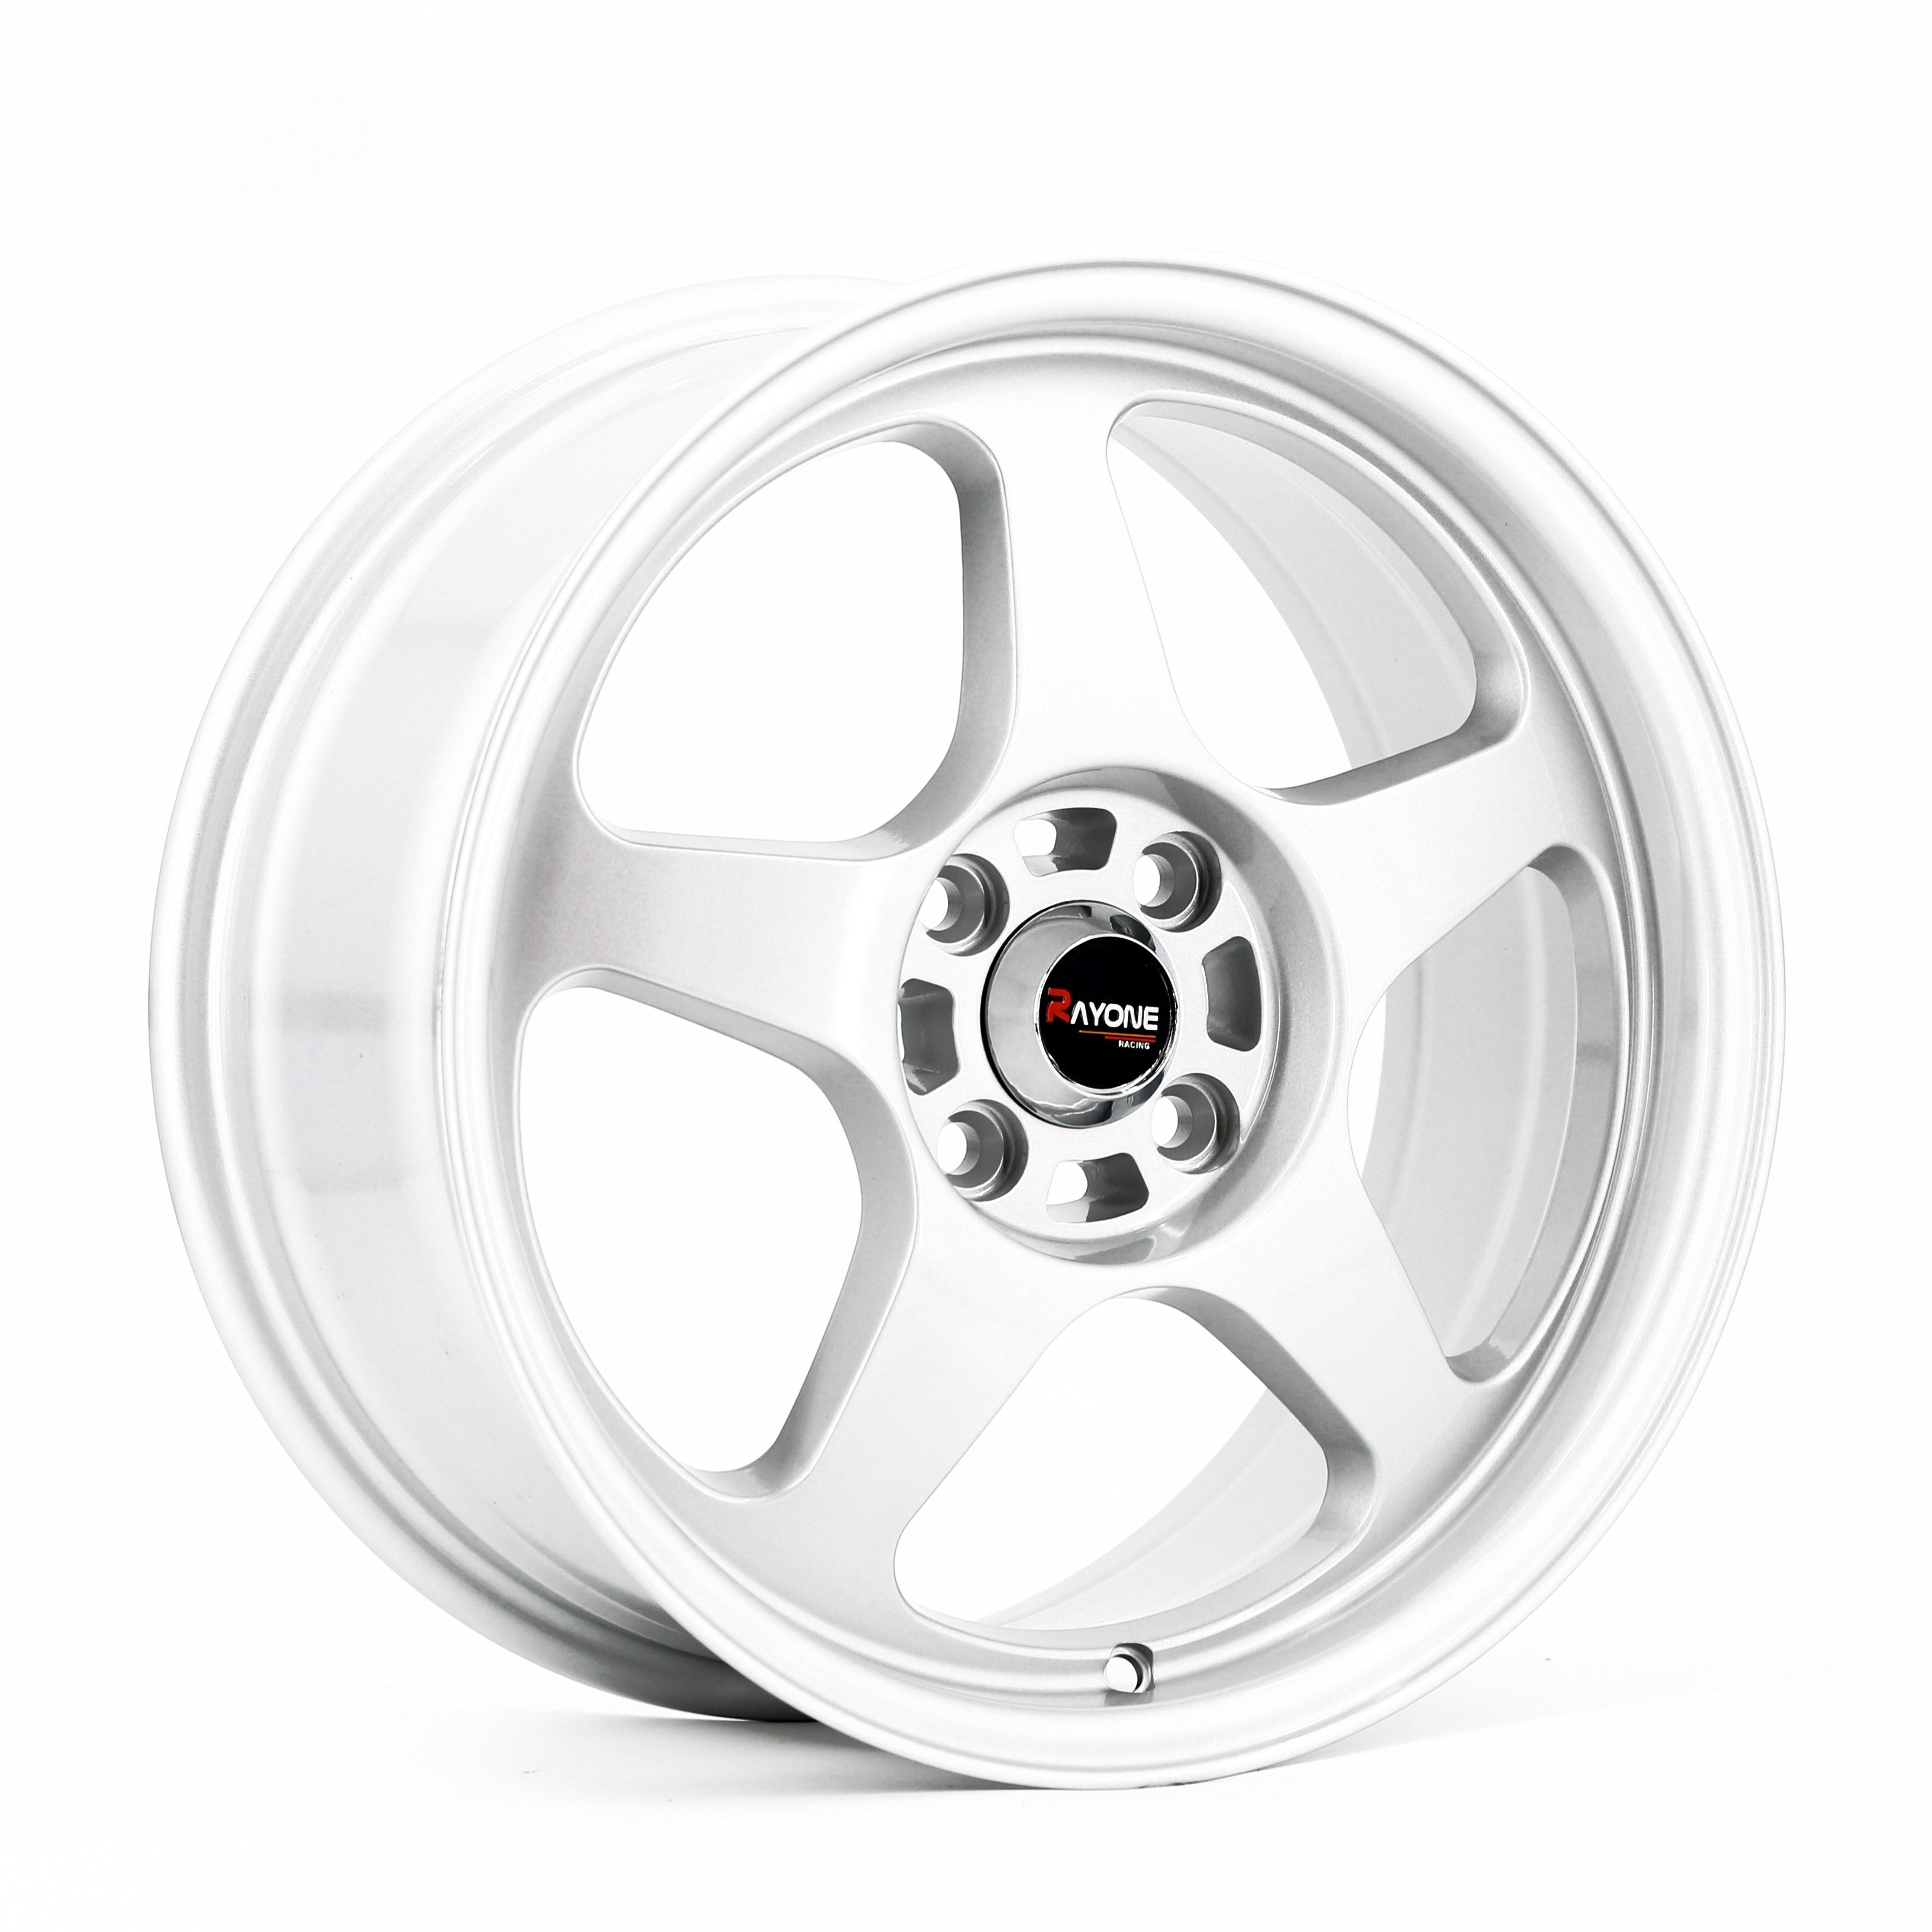 Super Lowest Price 16 Inch Mag Wheels - DM142 16Inch Aluminum Alloy Wheel Rims For Passenger Cars – Rayone